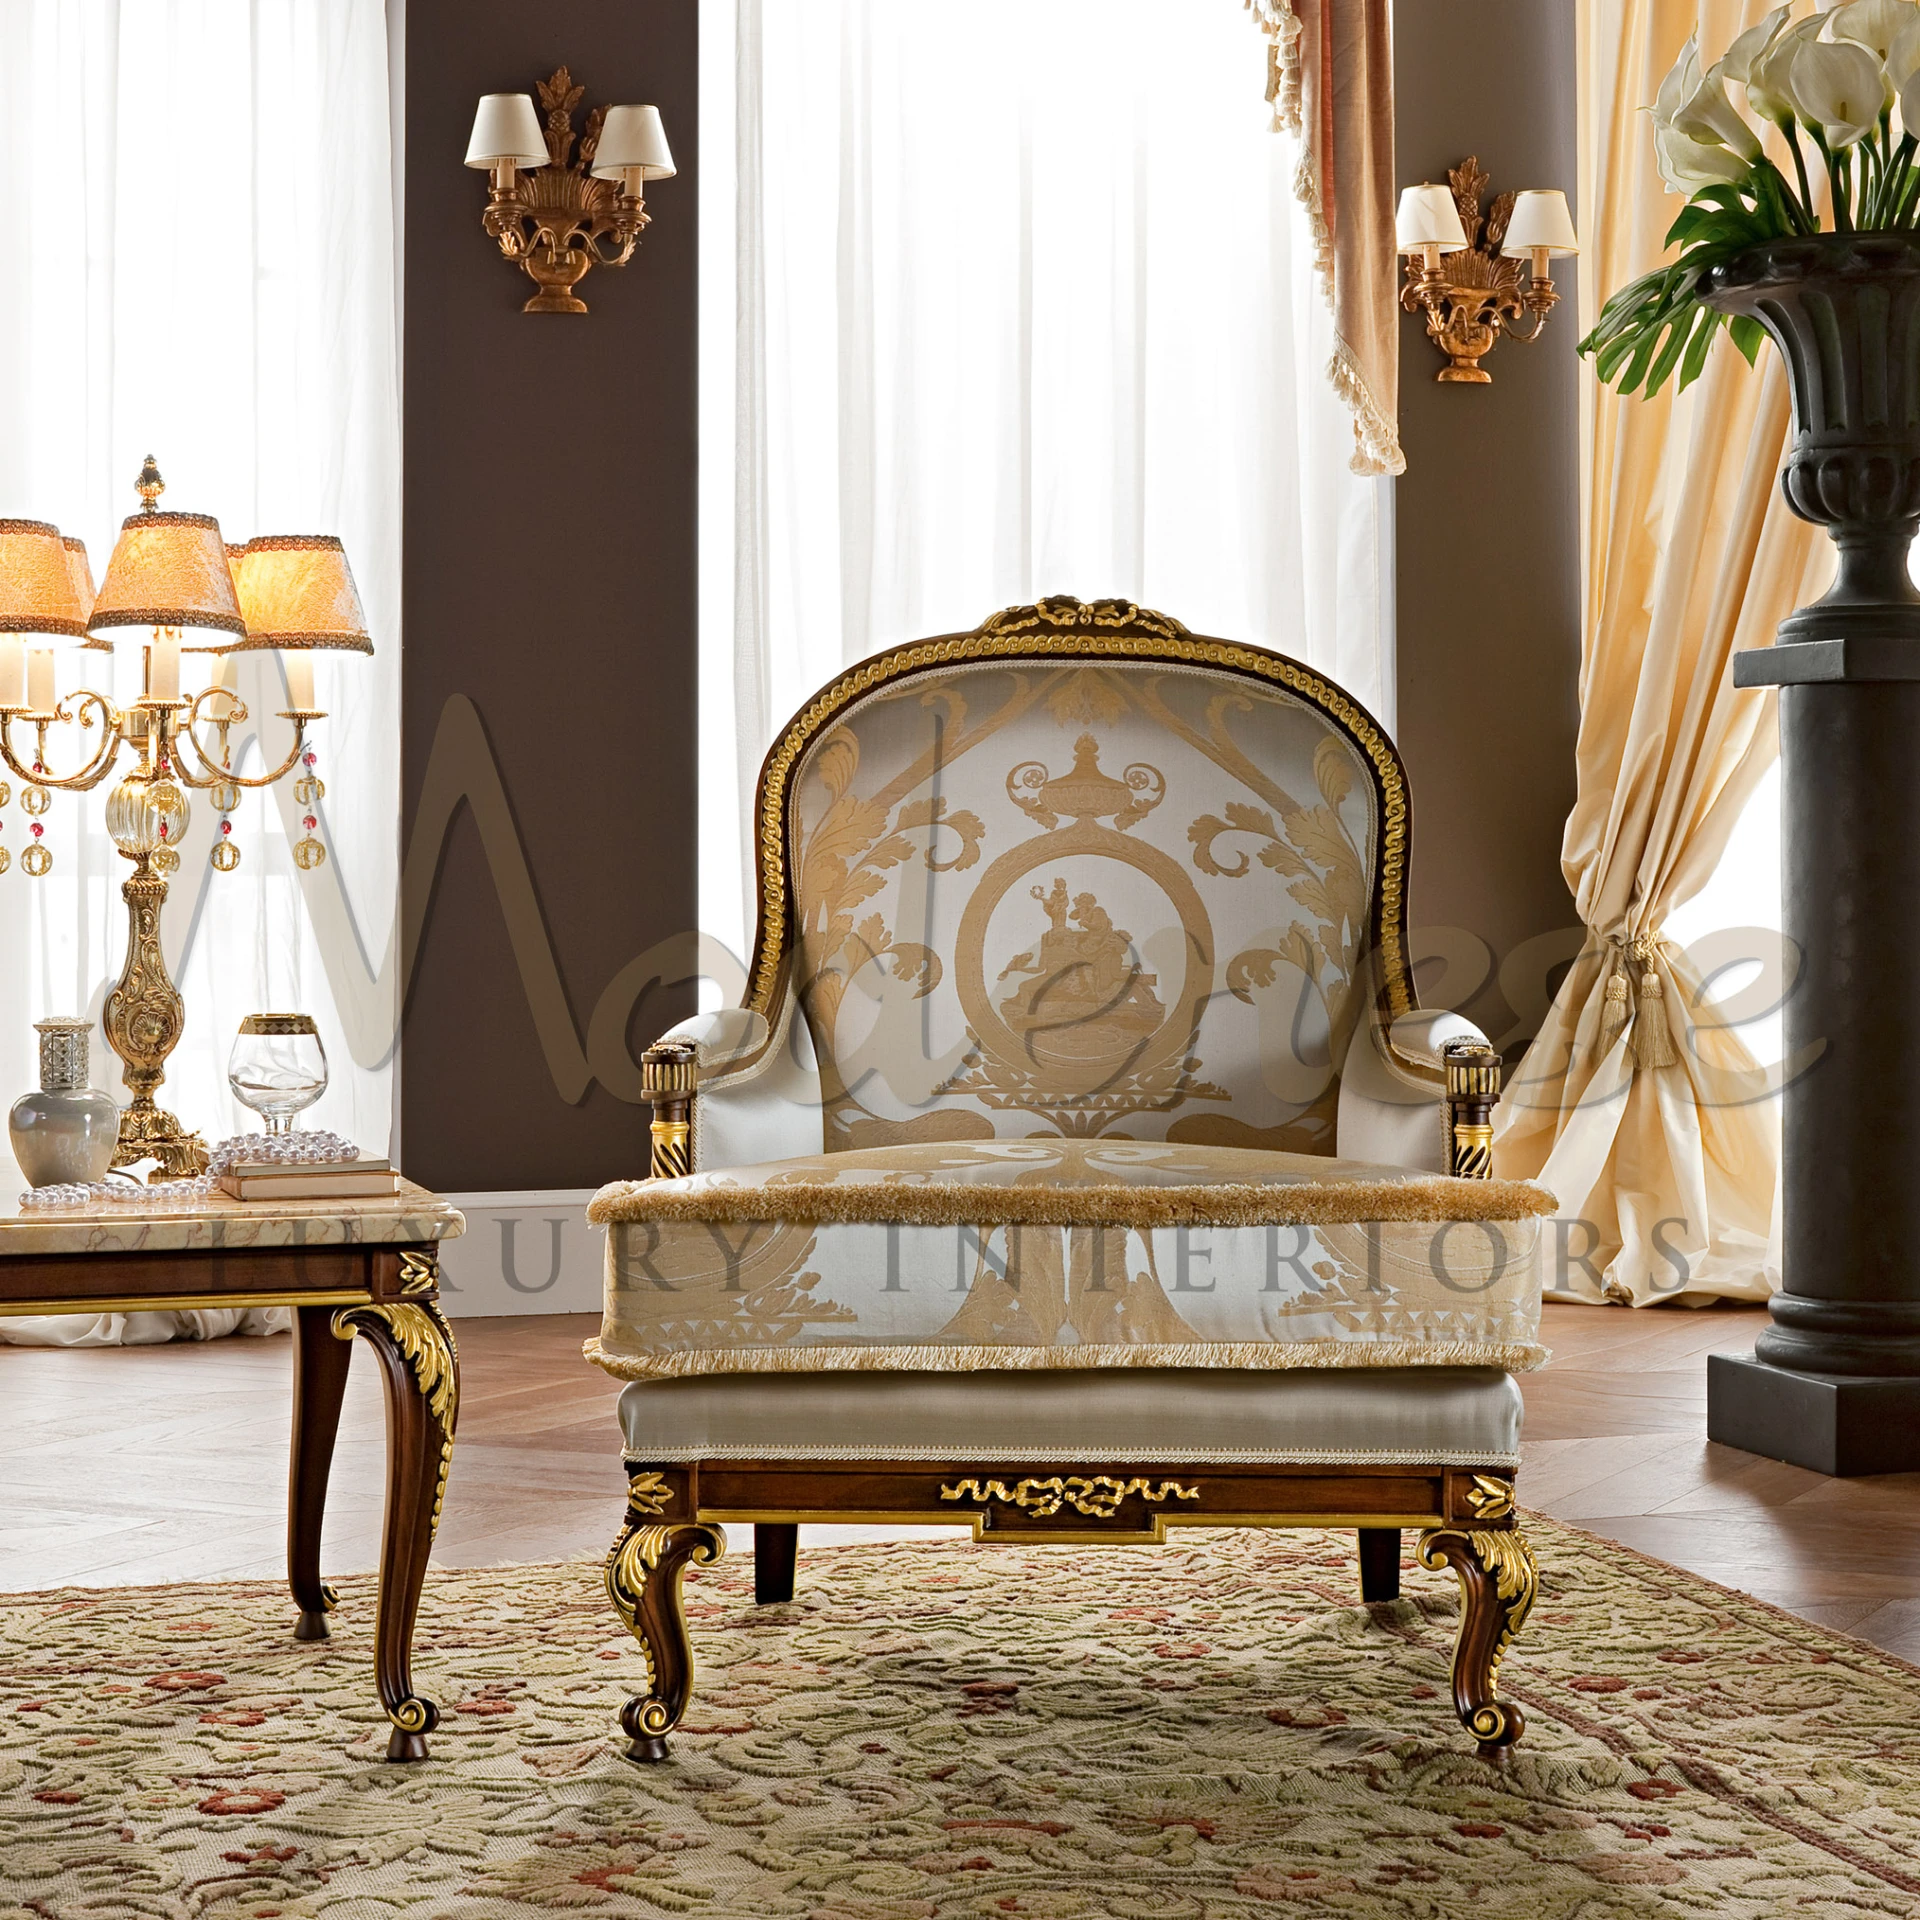 Refined Beige Victorian Armchair in Venetian style, a masterpiece of luxury armchairs with high-quality pattern fabric.
